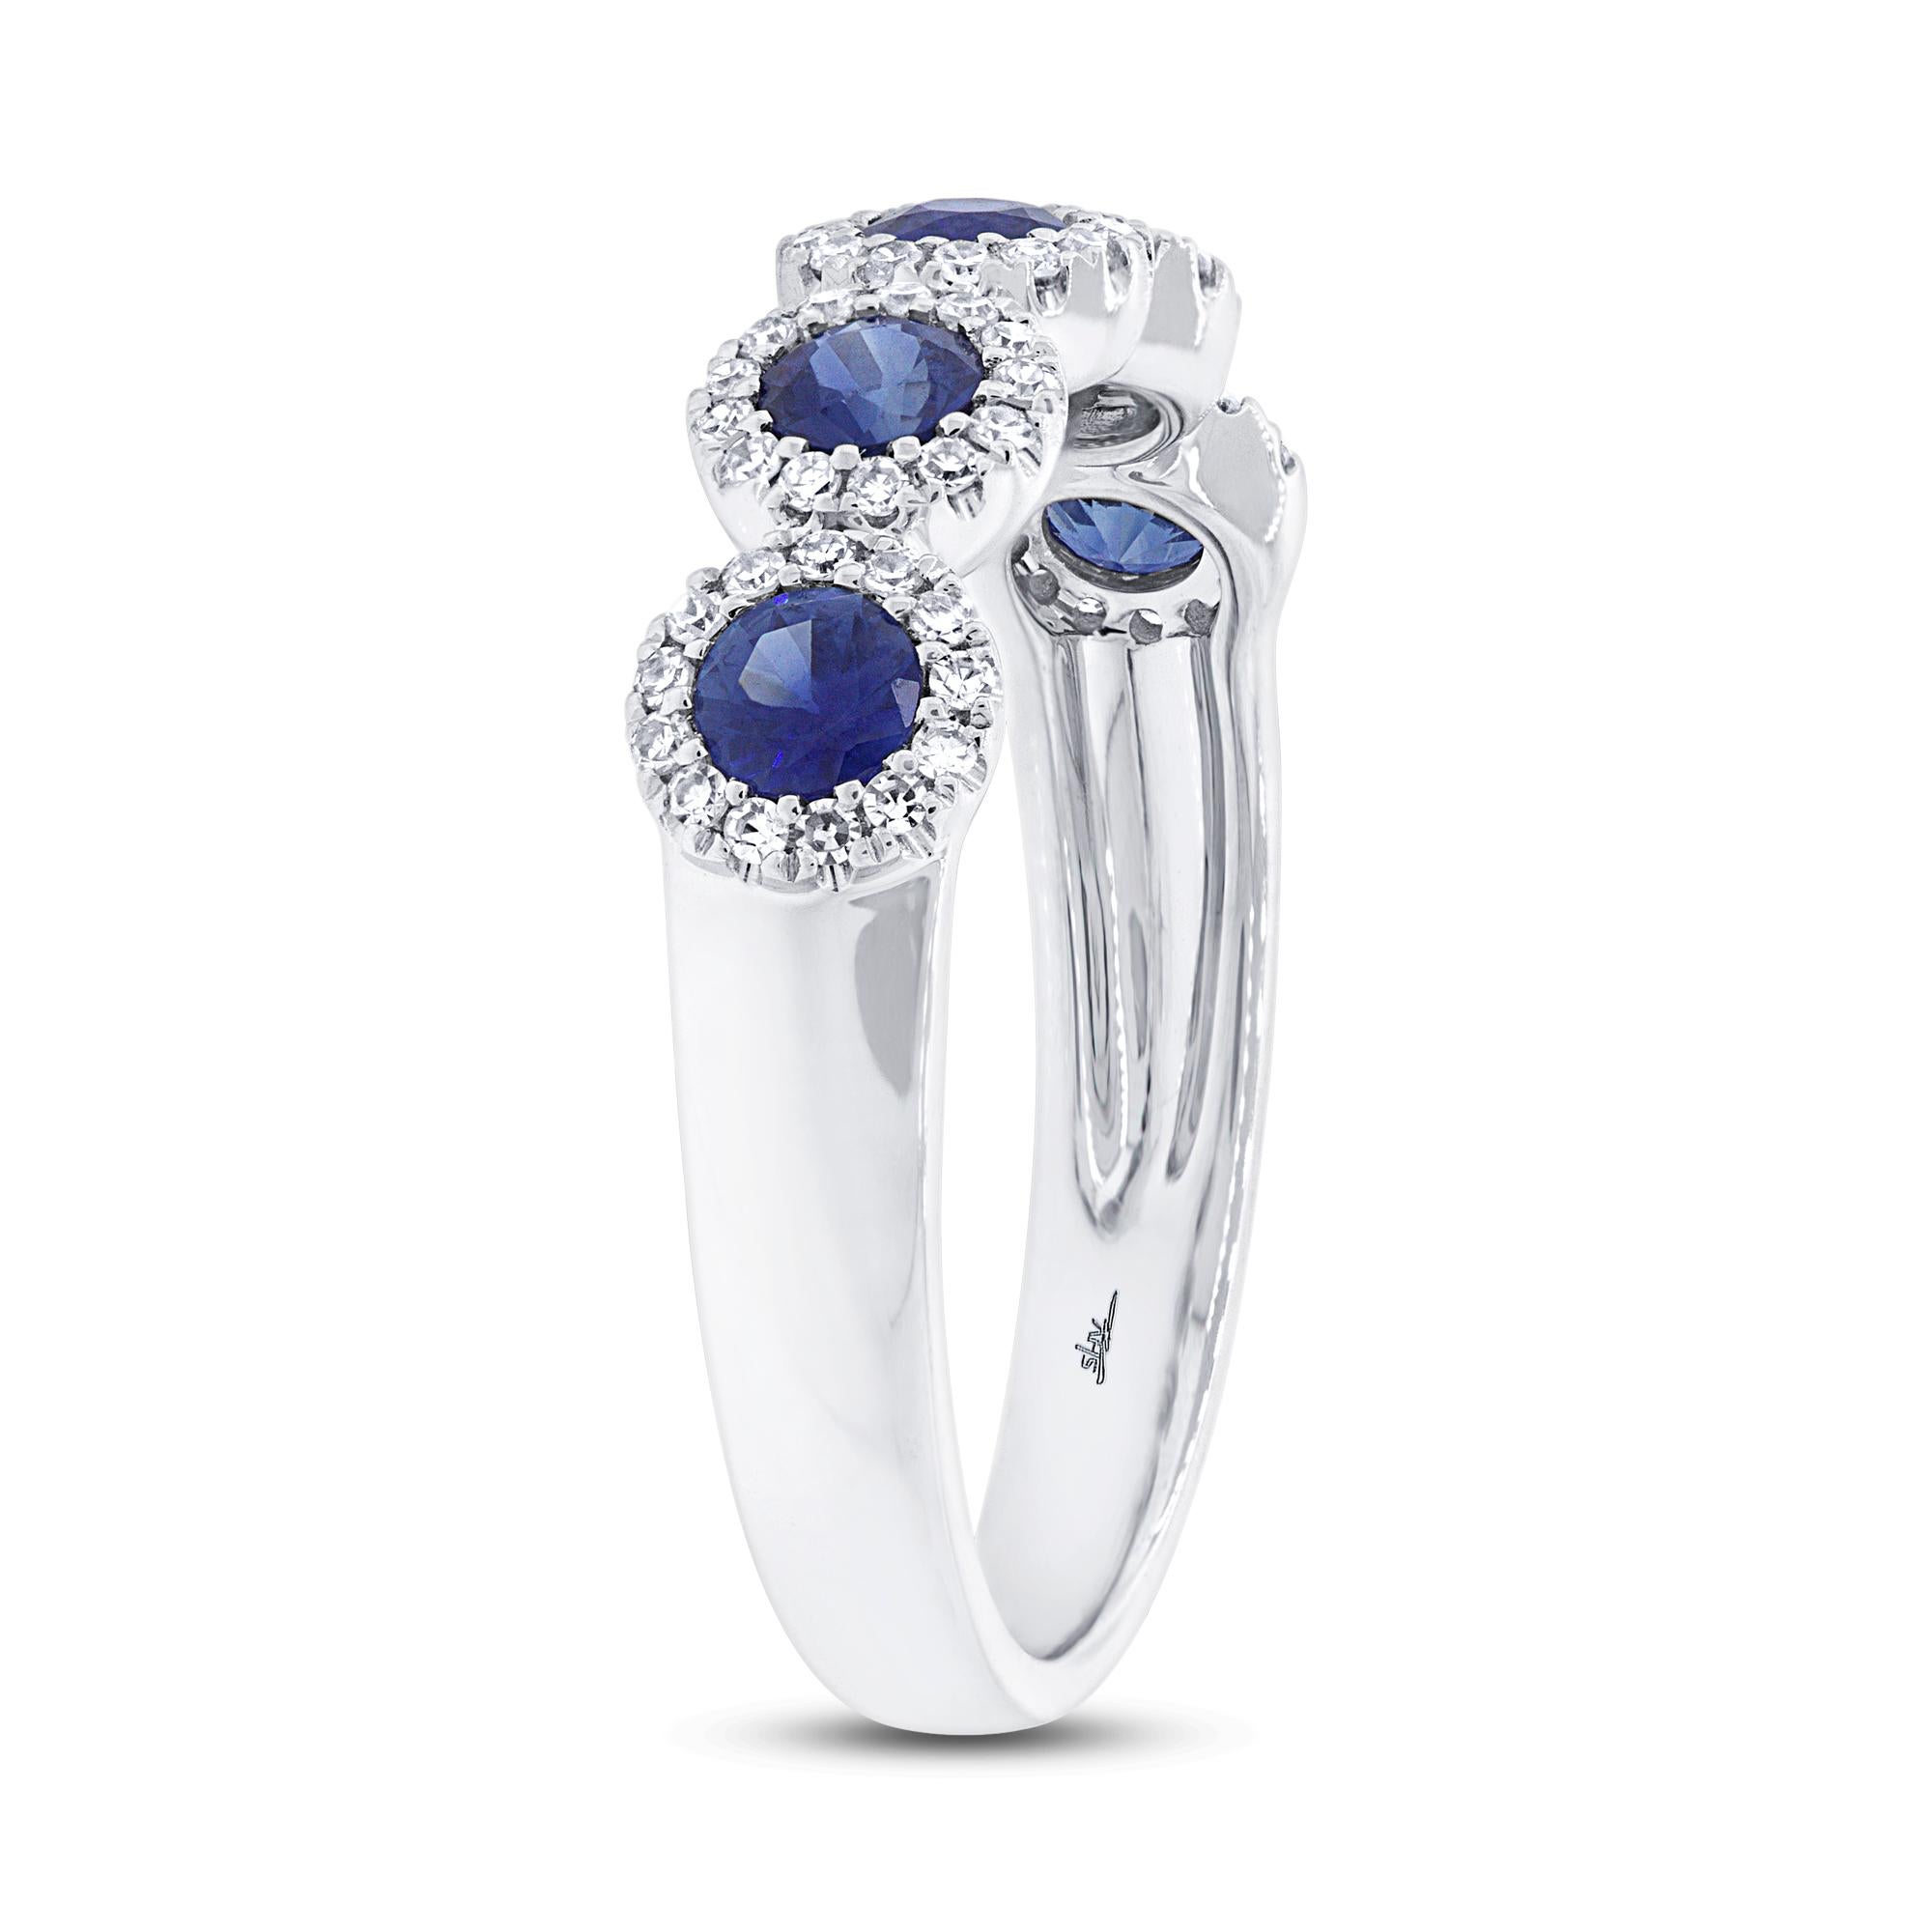 Show-stopping blue sparkle and contemporary elegance describe this gorgeous sapphire eternity ring. It features five dainty blue sapphires, each encircled by a ravishing diamond halo. Flawlessly polished for a luxurious look and feel. A perfect gift